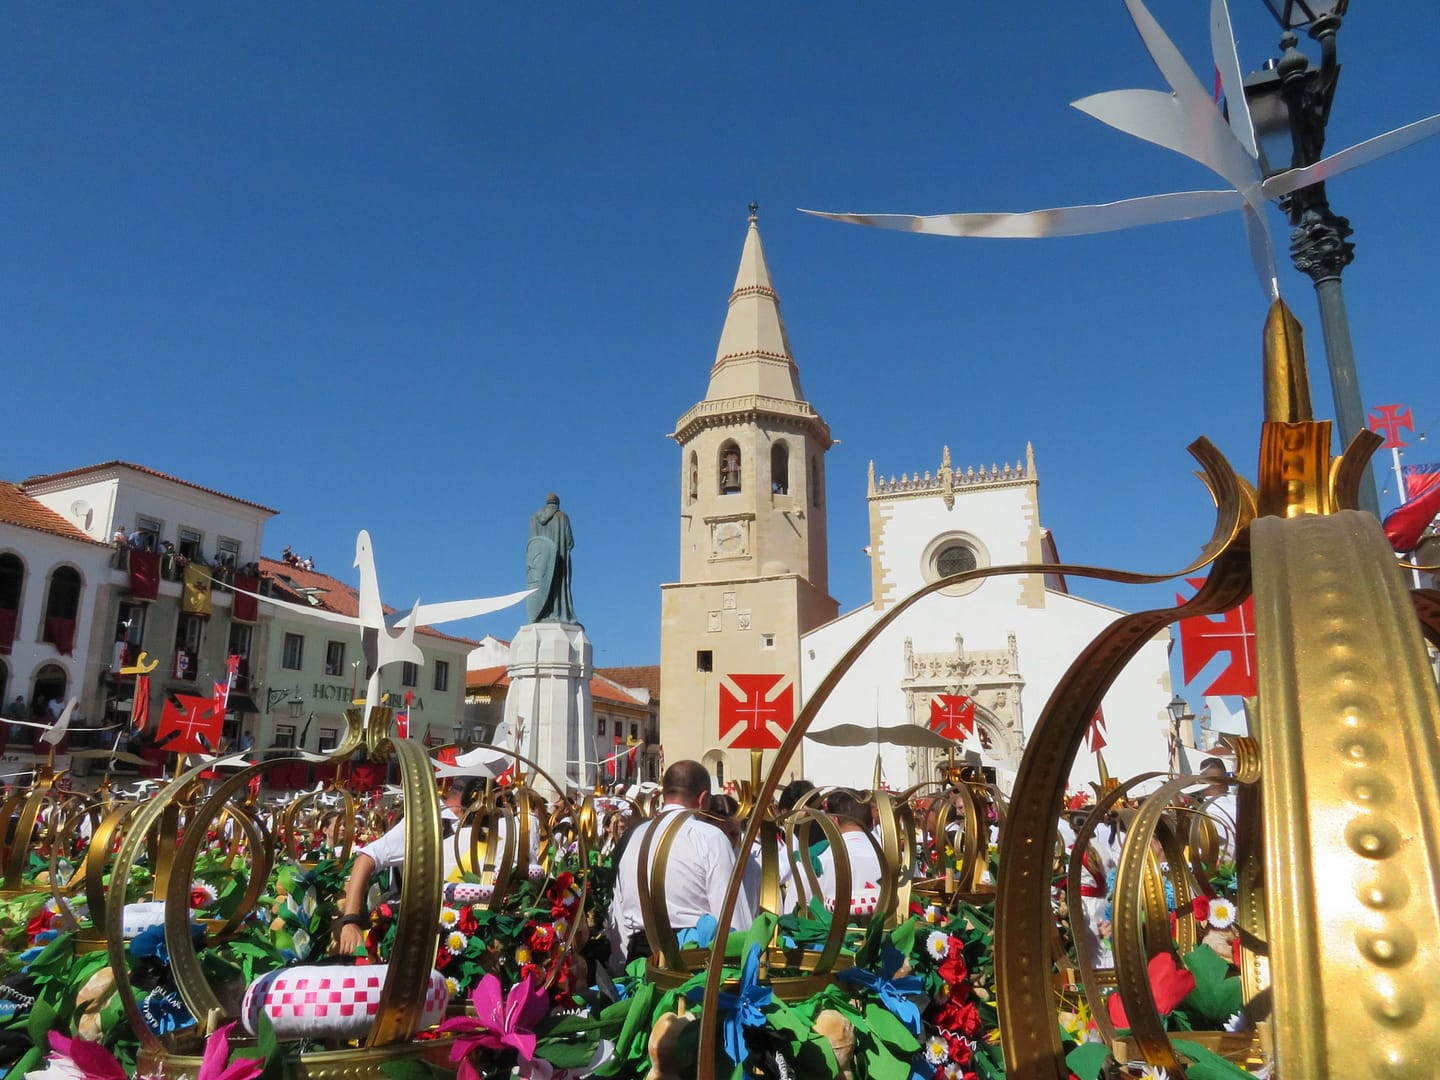 The Festa dos Tabuleiros in Tomar, Portugal is an event that should not be missed. (Photo by Mark Stachiew)